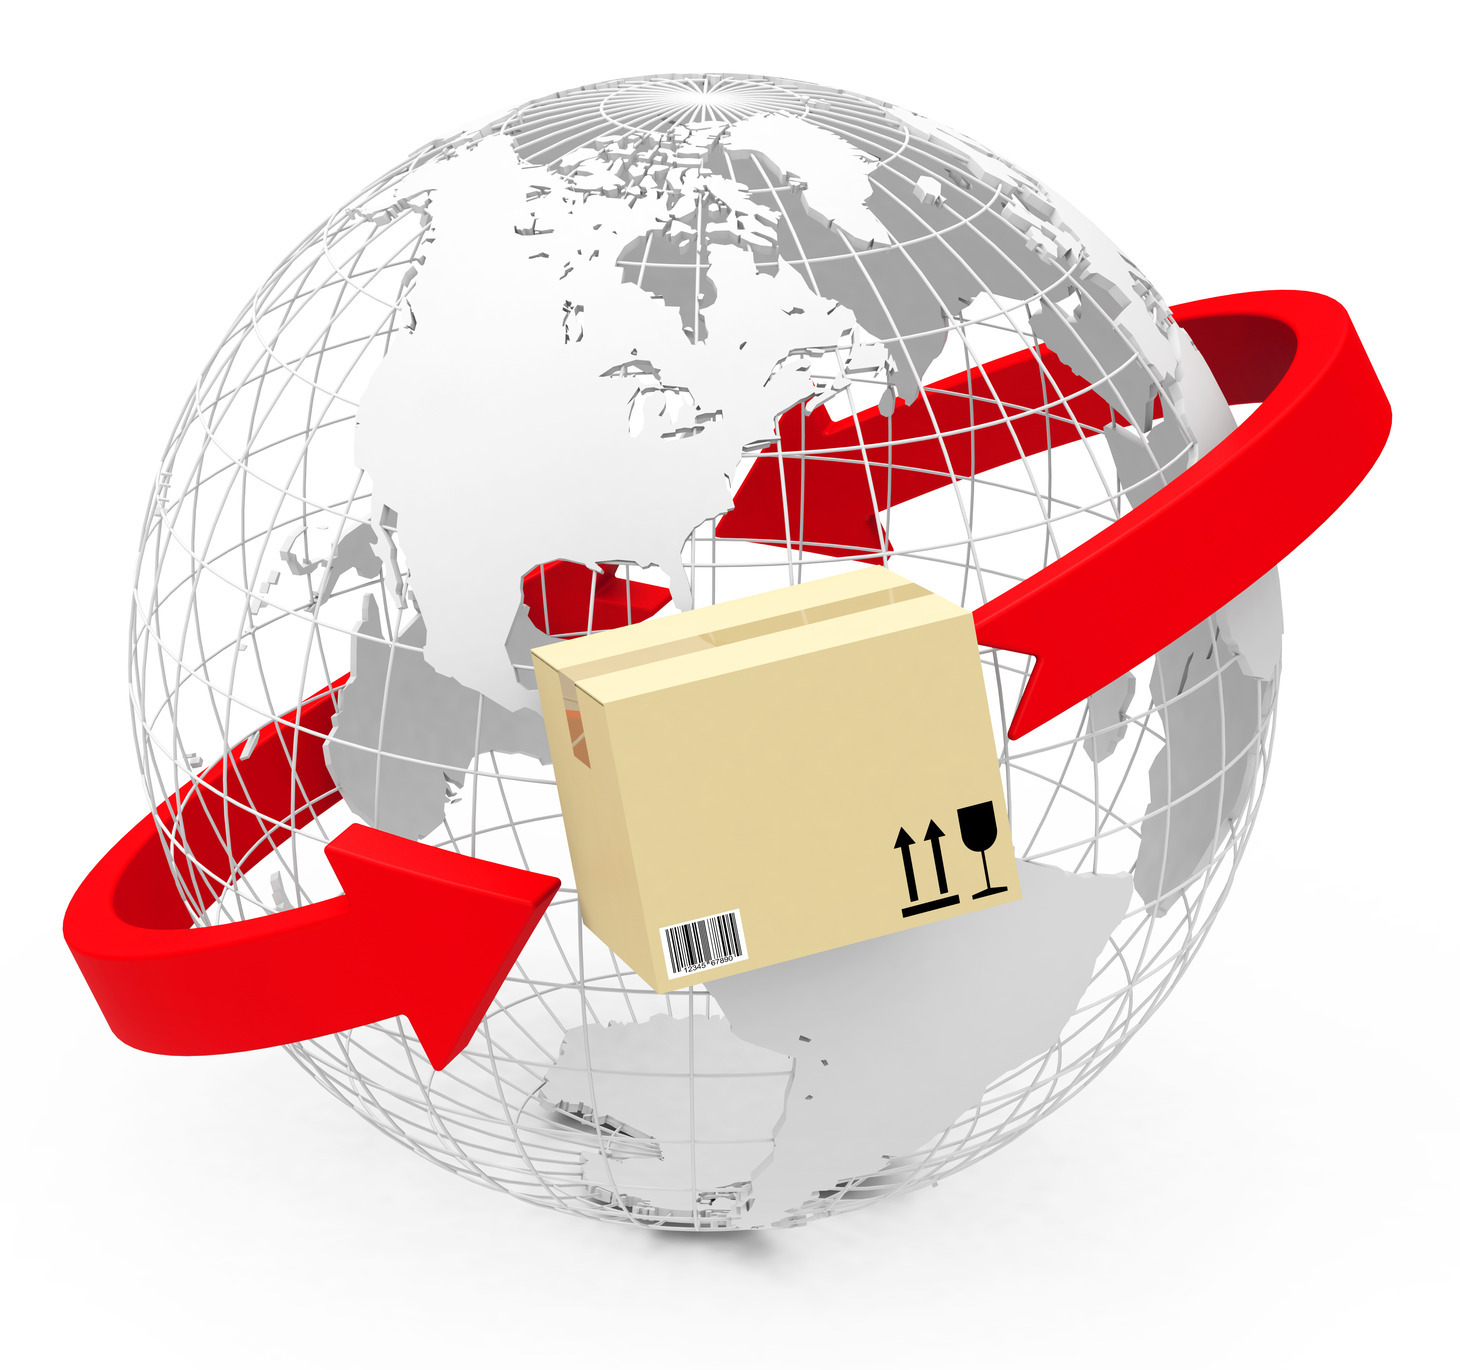 Global Priority Shipping and Logistics Services